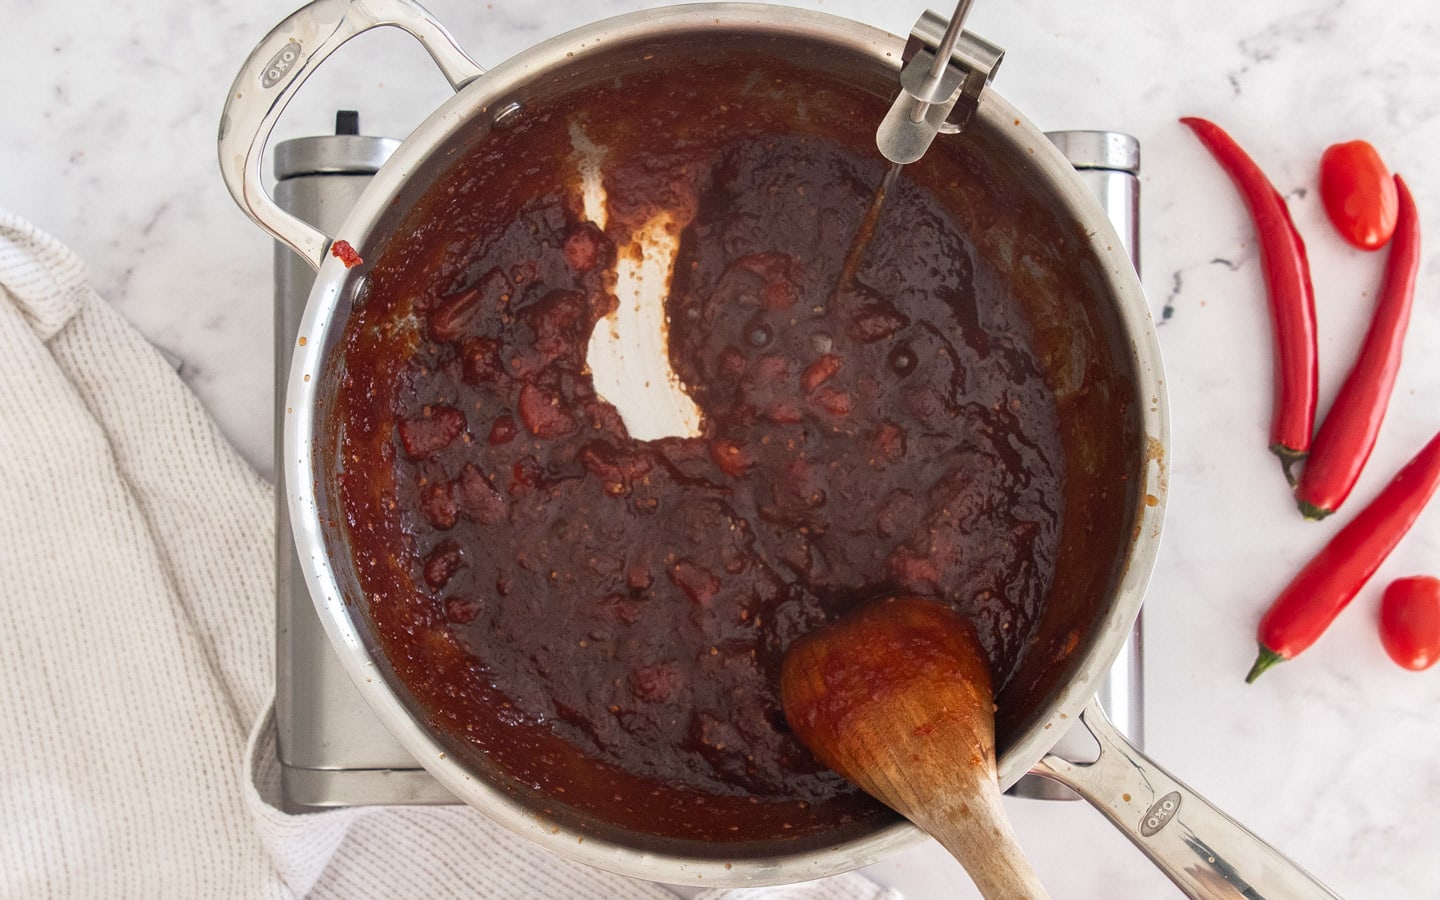 The jam at the end of the process in the pan, showing the consistency.